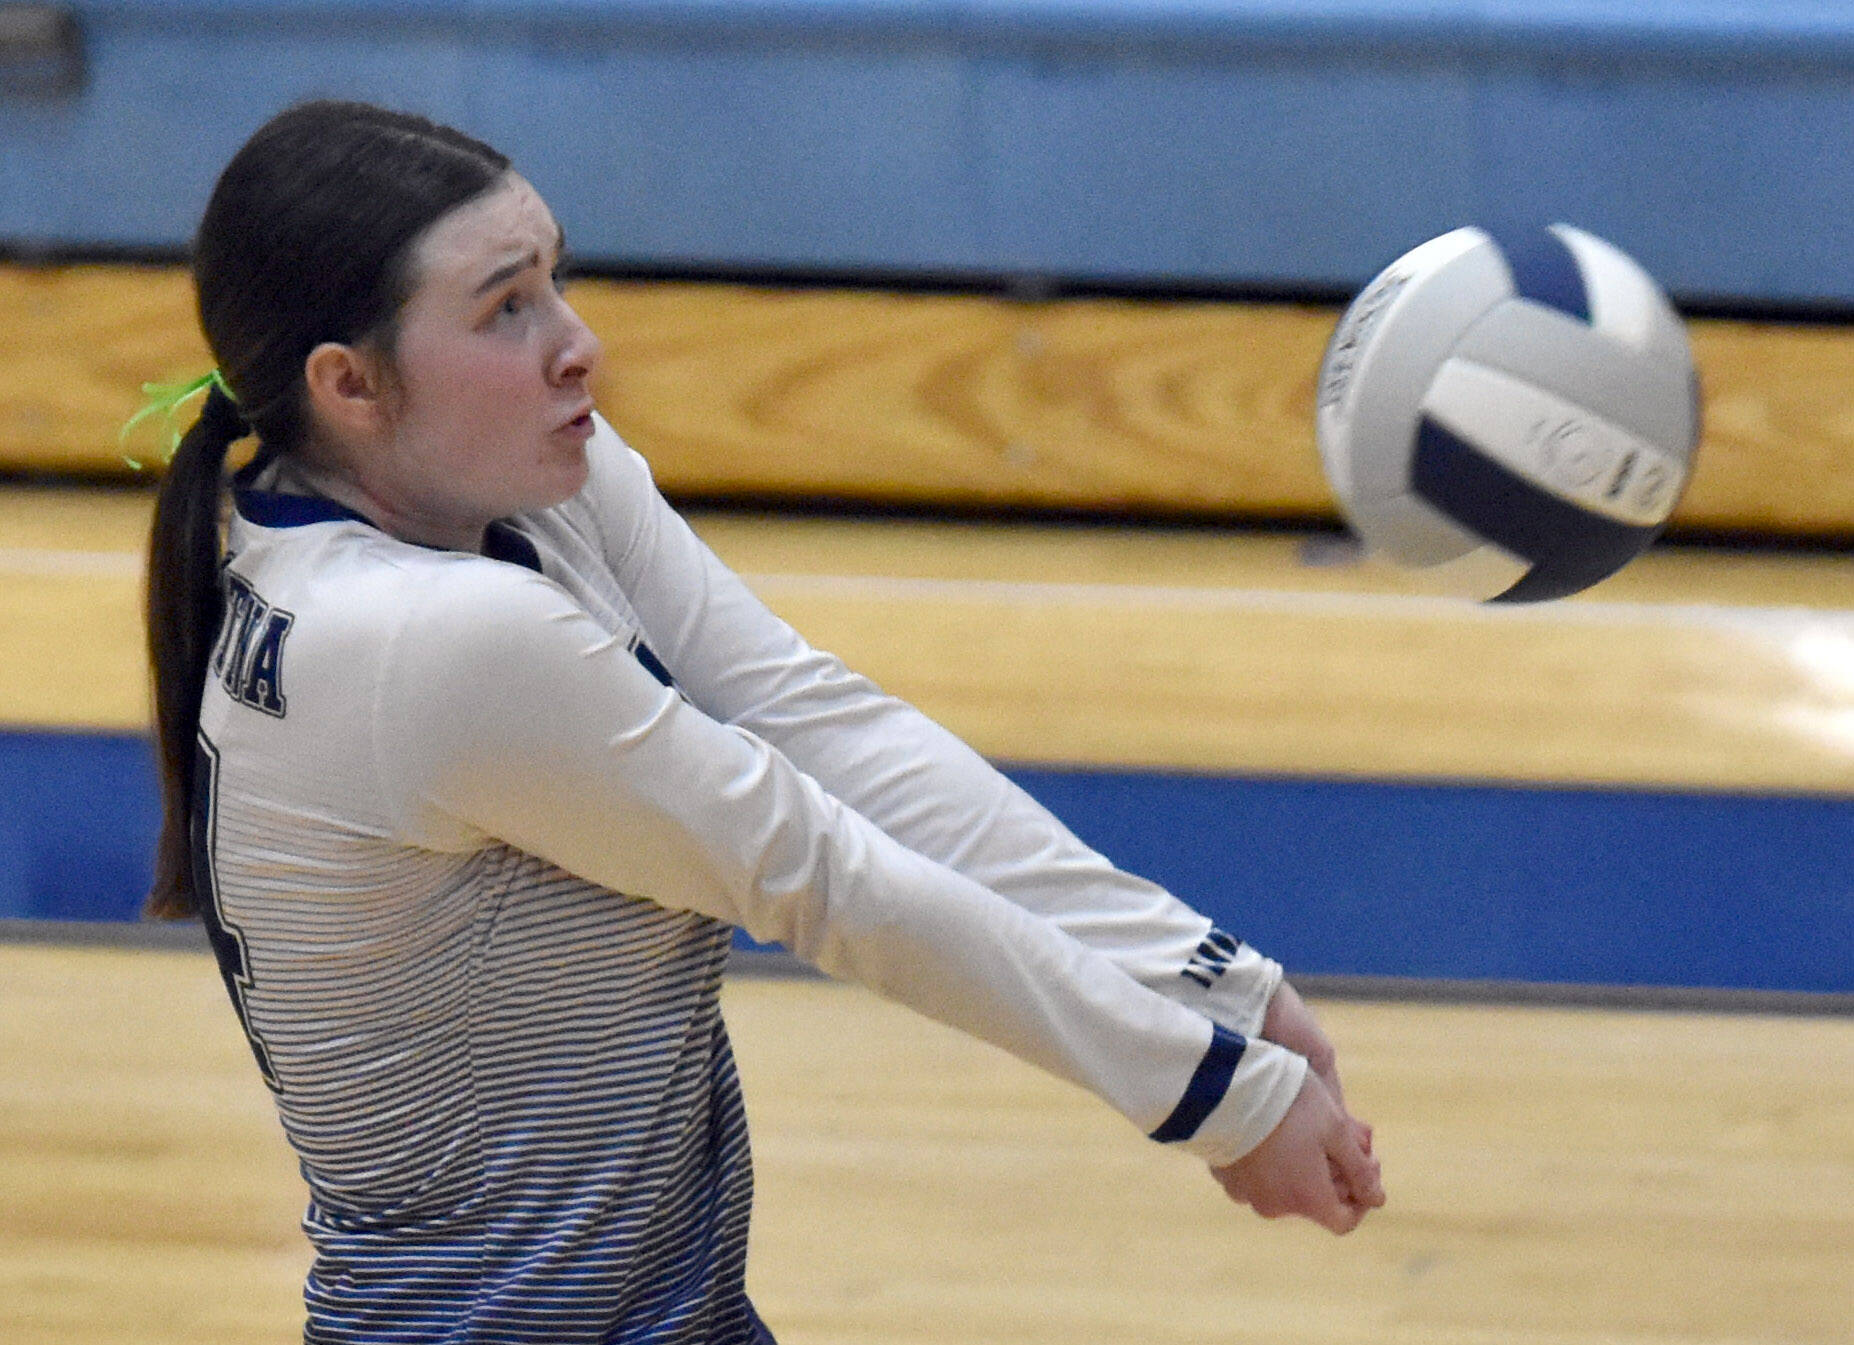 Soldotna’s Clare Henry digs up a ball against Kenai Central on Tuesday, Oct. 25, 2022, at Soldotna High School in Soldotna, Alaska. (Photo by Jeff Helminiak/Peninsula Clarion)